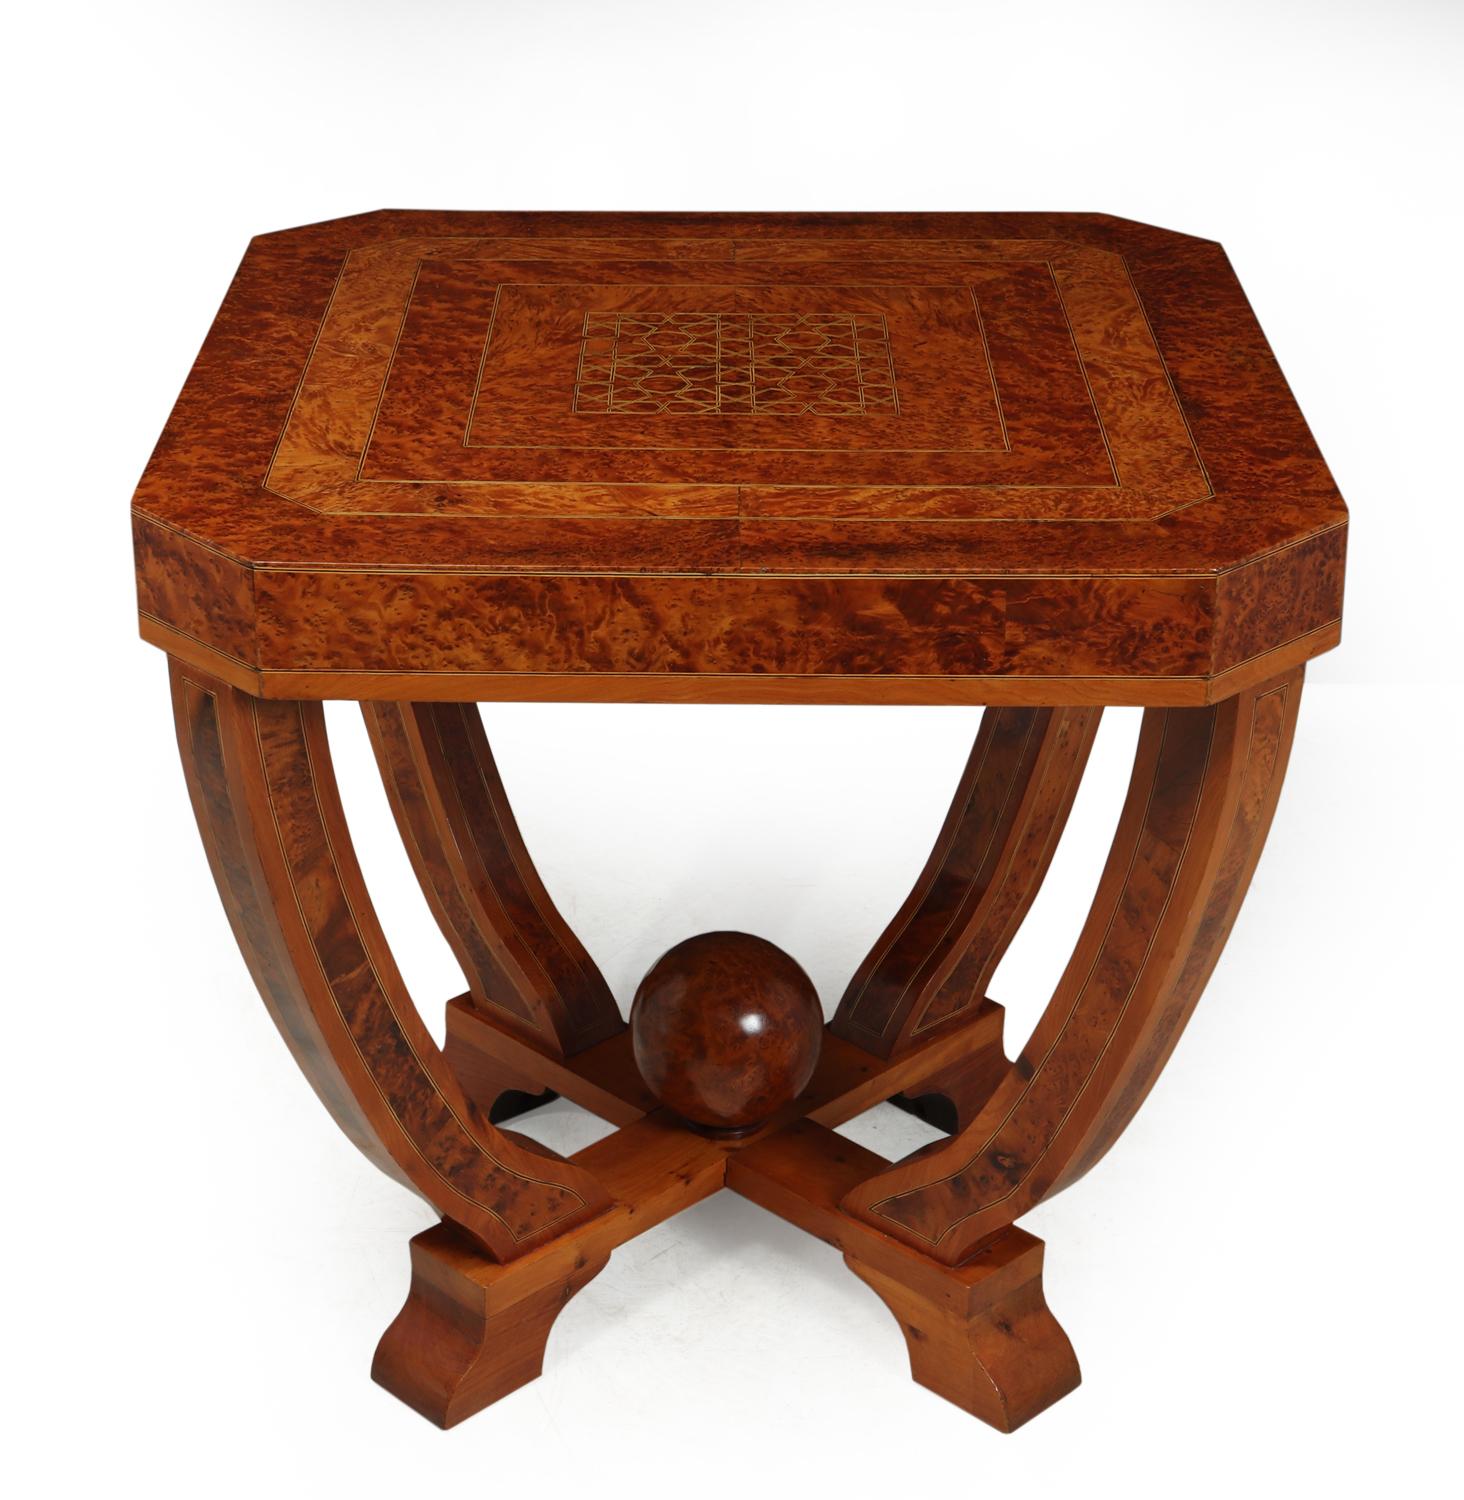 Art Deco coffee table in burr yew circa 1930
An exceptional quality table produced in solid Yew and inlaid in burr Yew with boxwood and ebony stringing, the central ball is a solid turned burr, the table is in excellent condition having been fully